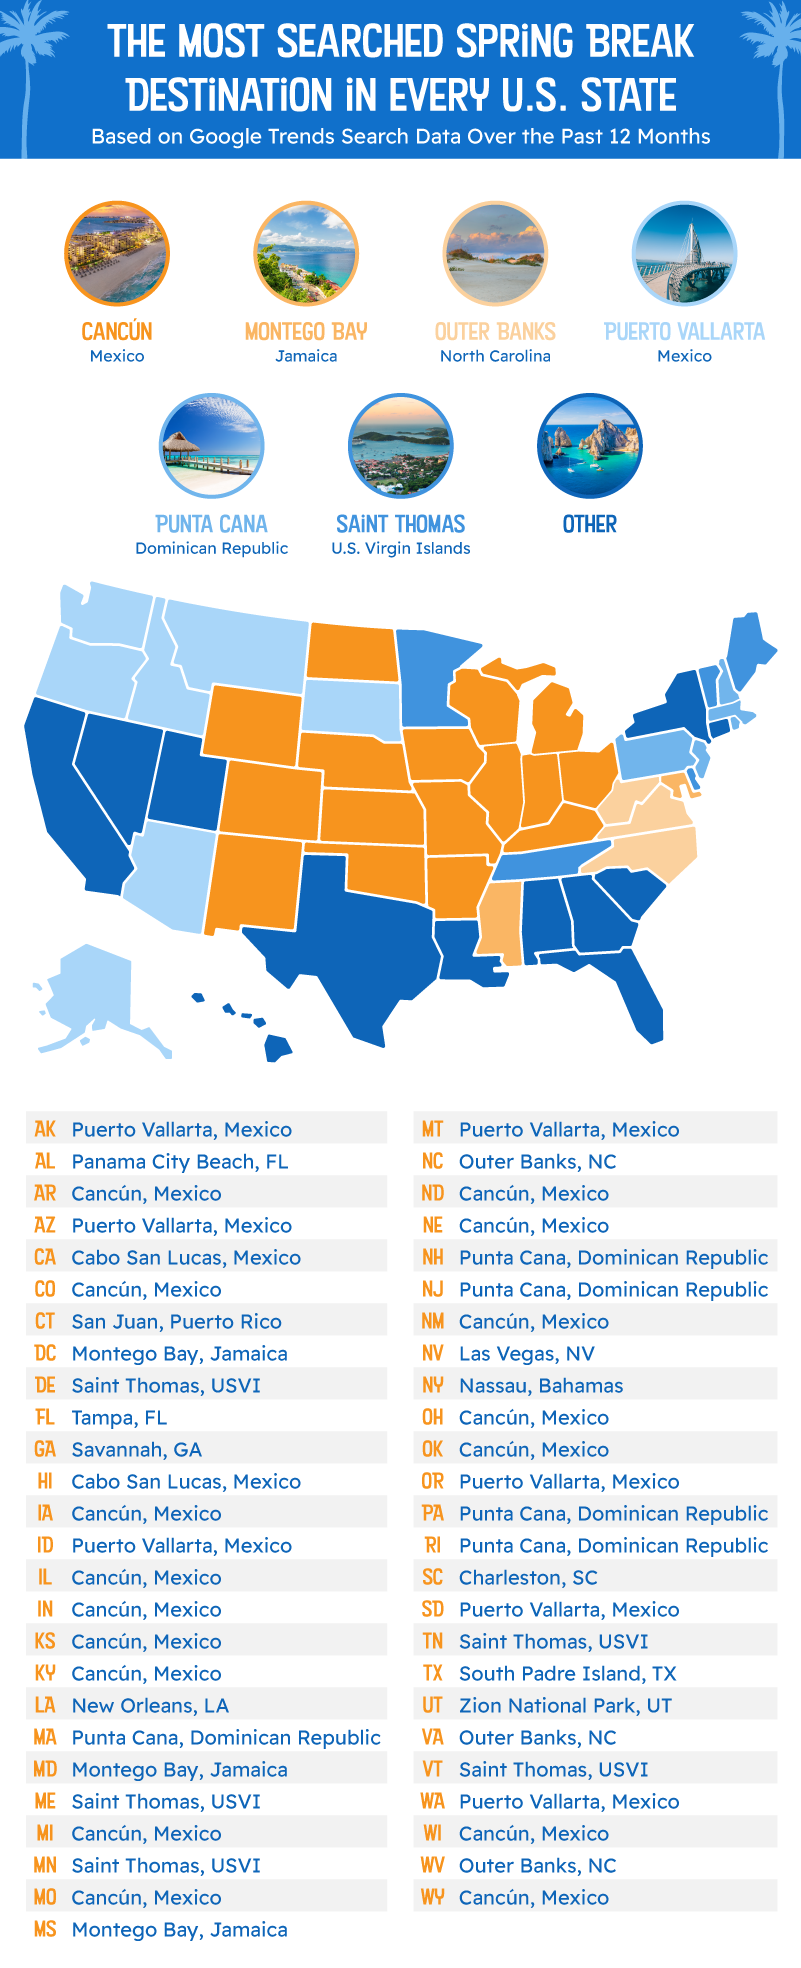 A chart depicting every U.S. state’s most searched for spring break destination